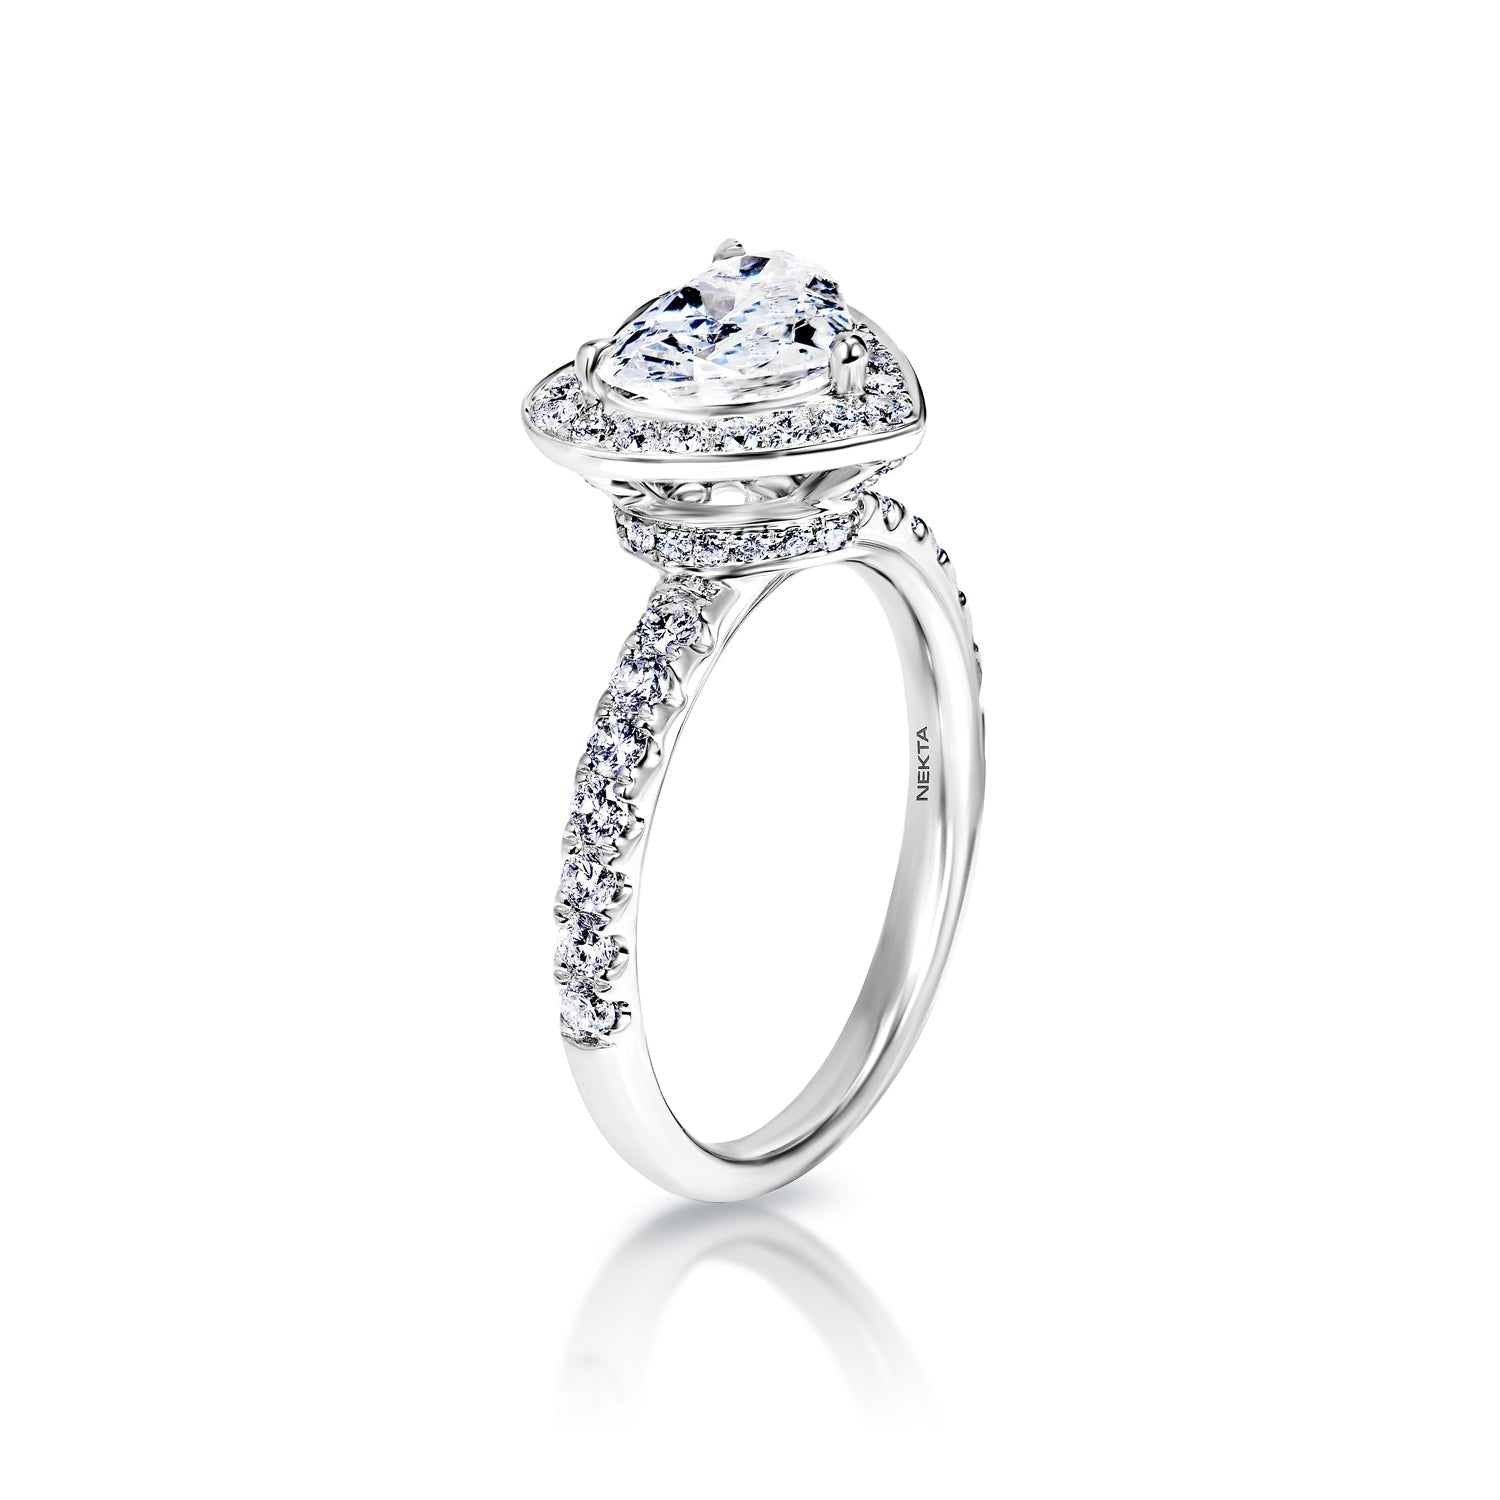 Kayla 2 Carat H SI3 Heart Shape Diamond Engagement Ring in 18k White Gold Side View